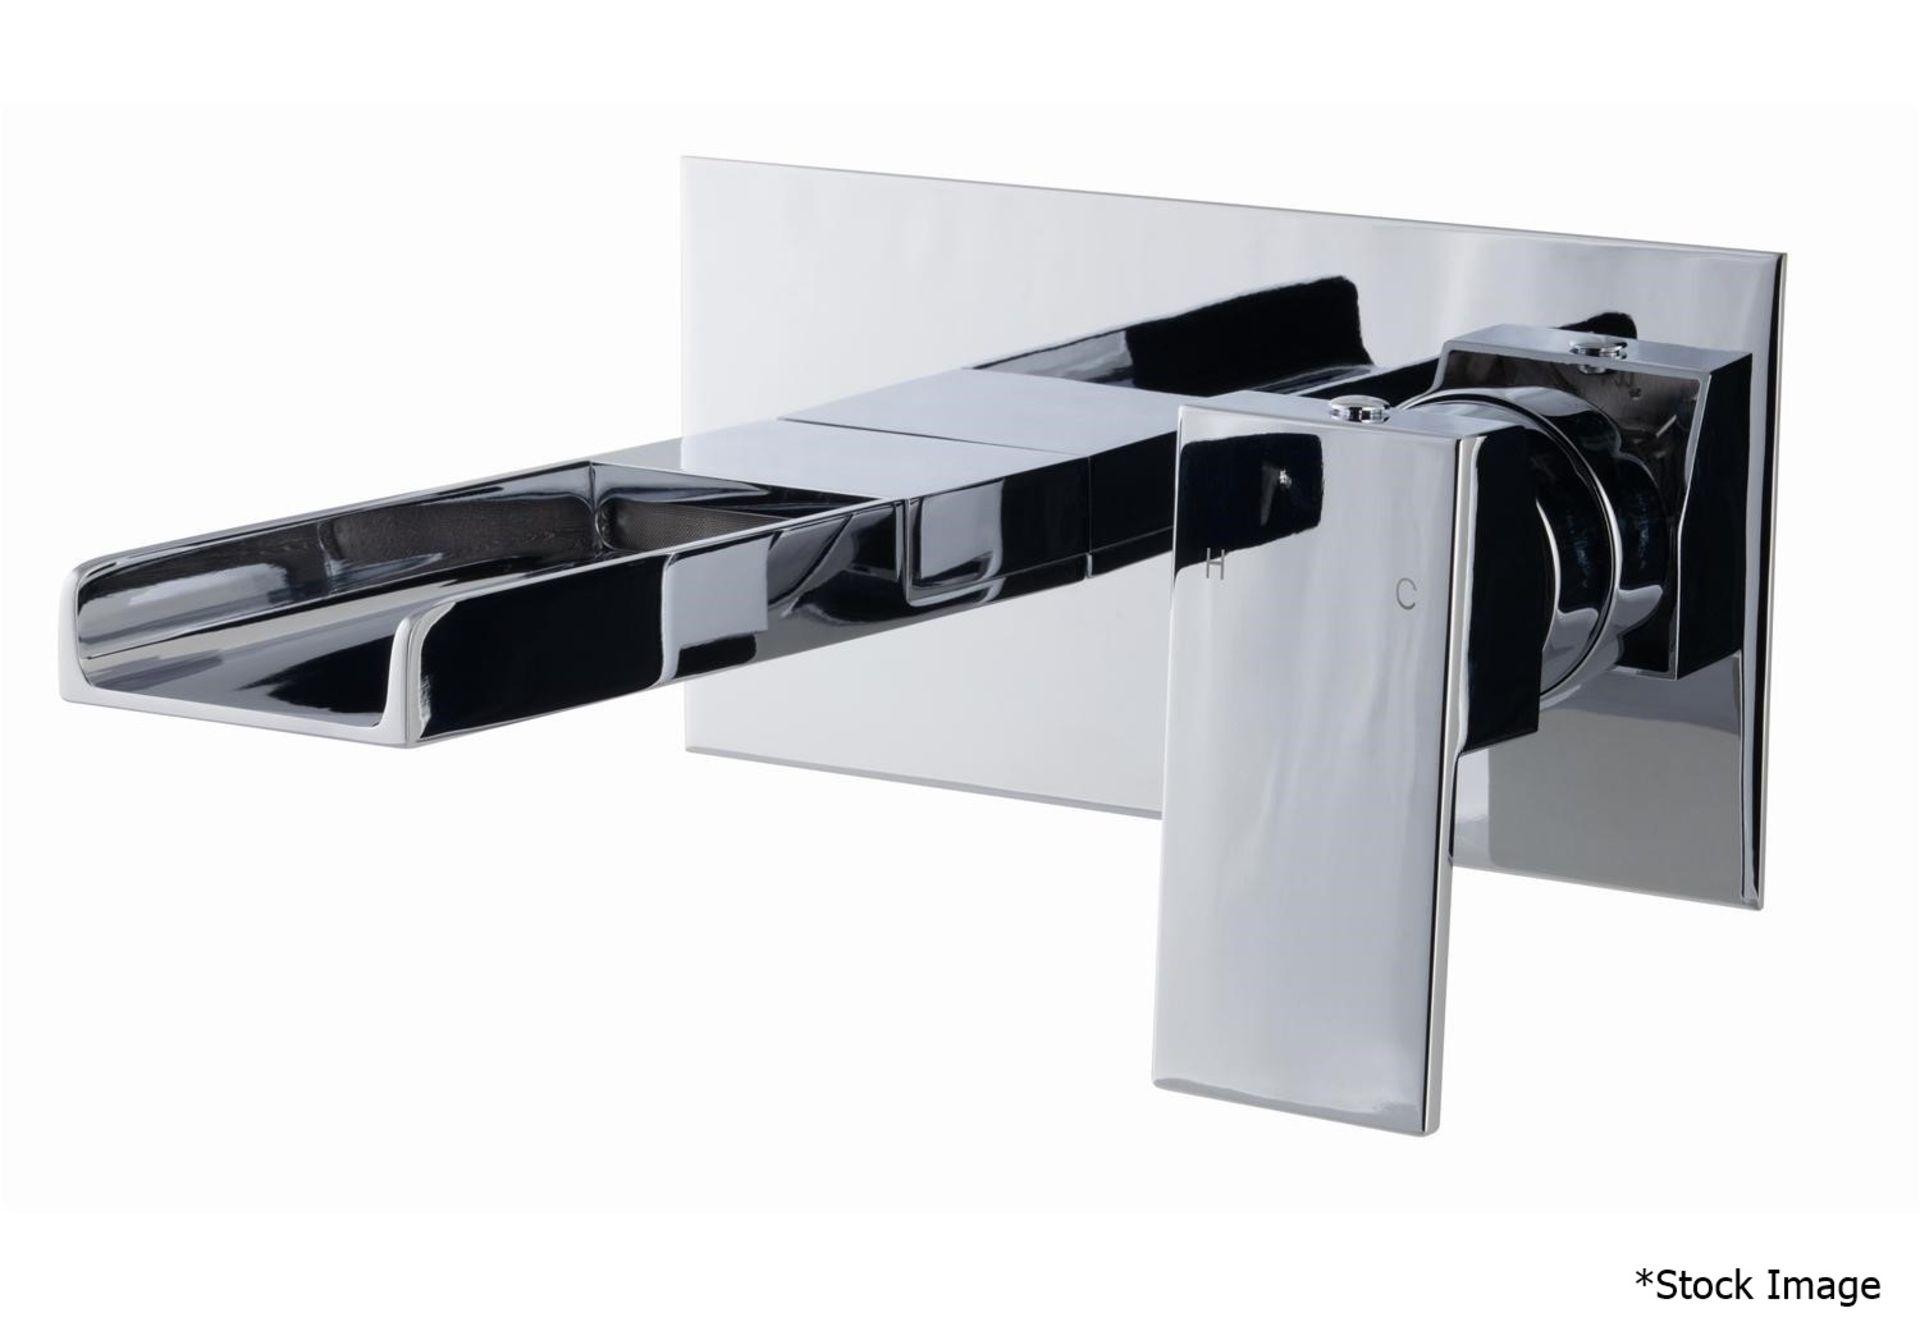 1 x Cassellie 'Dunk' Wall Mounted Waterfall Bath Tap - Ref: DUK016 - New & Boxed Stock - RRP 130.00 - Image 2 of 4